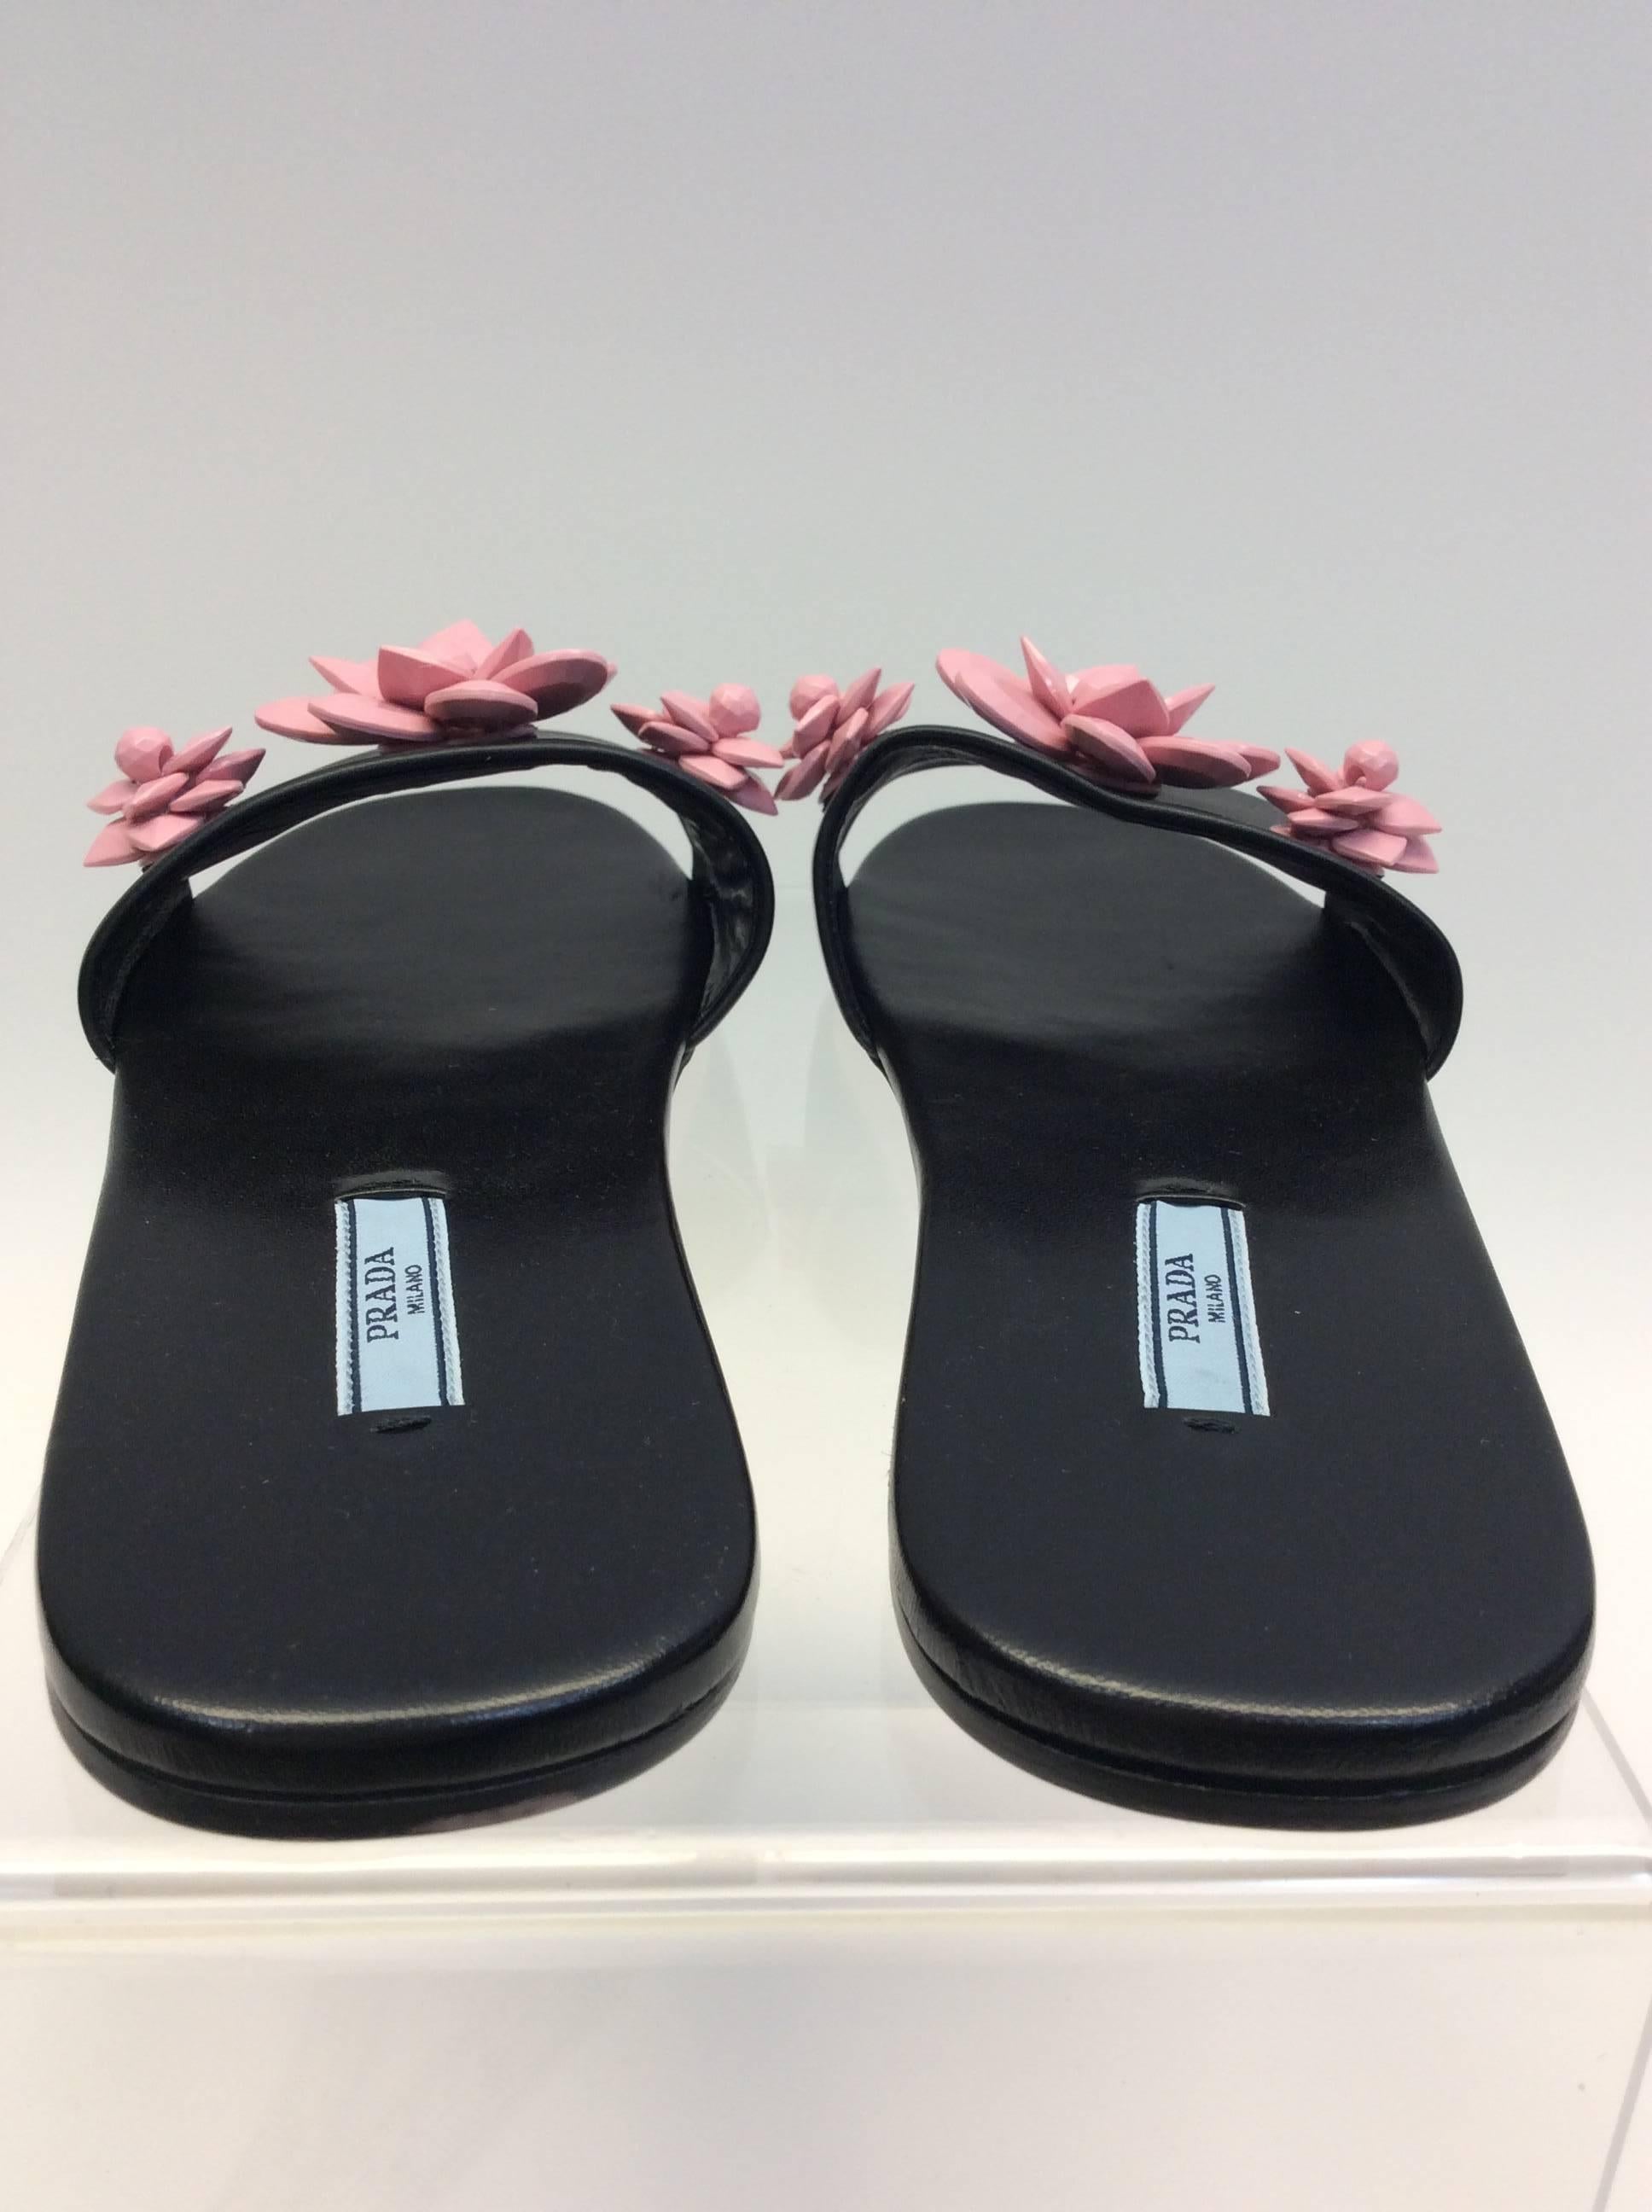 Prada Pink and Black Leather Flower Sandal  In Excellent Condition For Sale In Narberth, PA